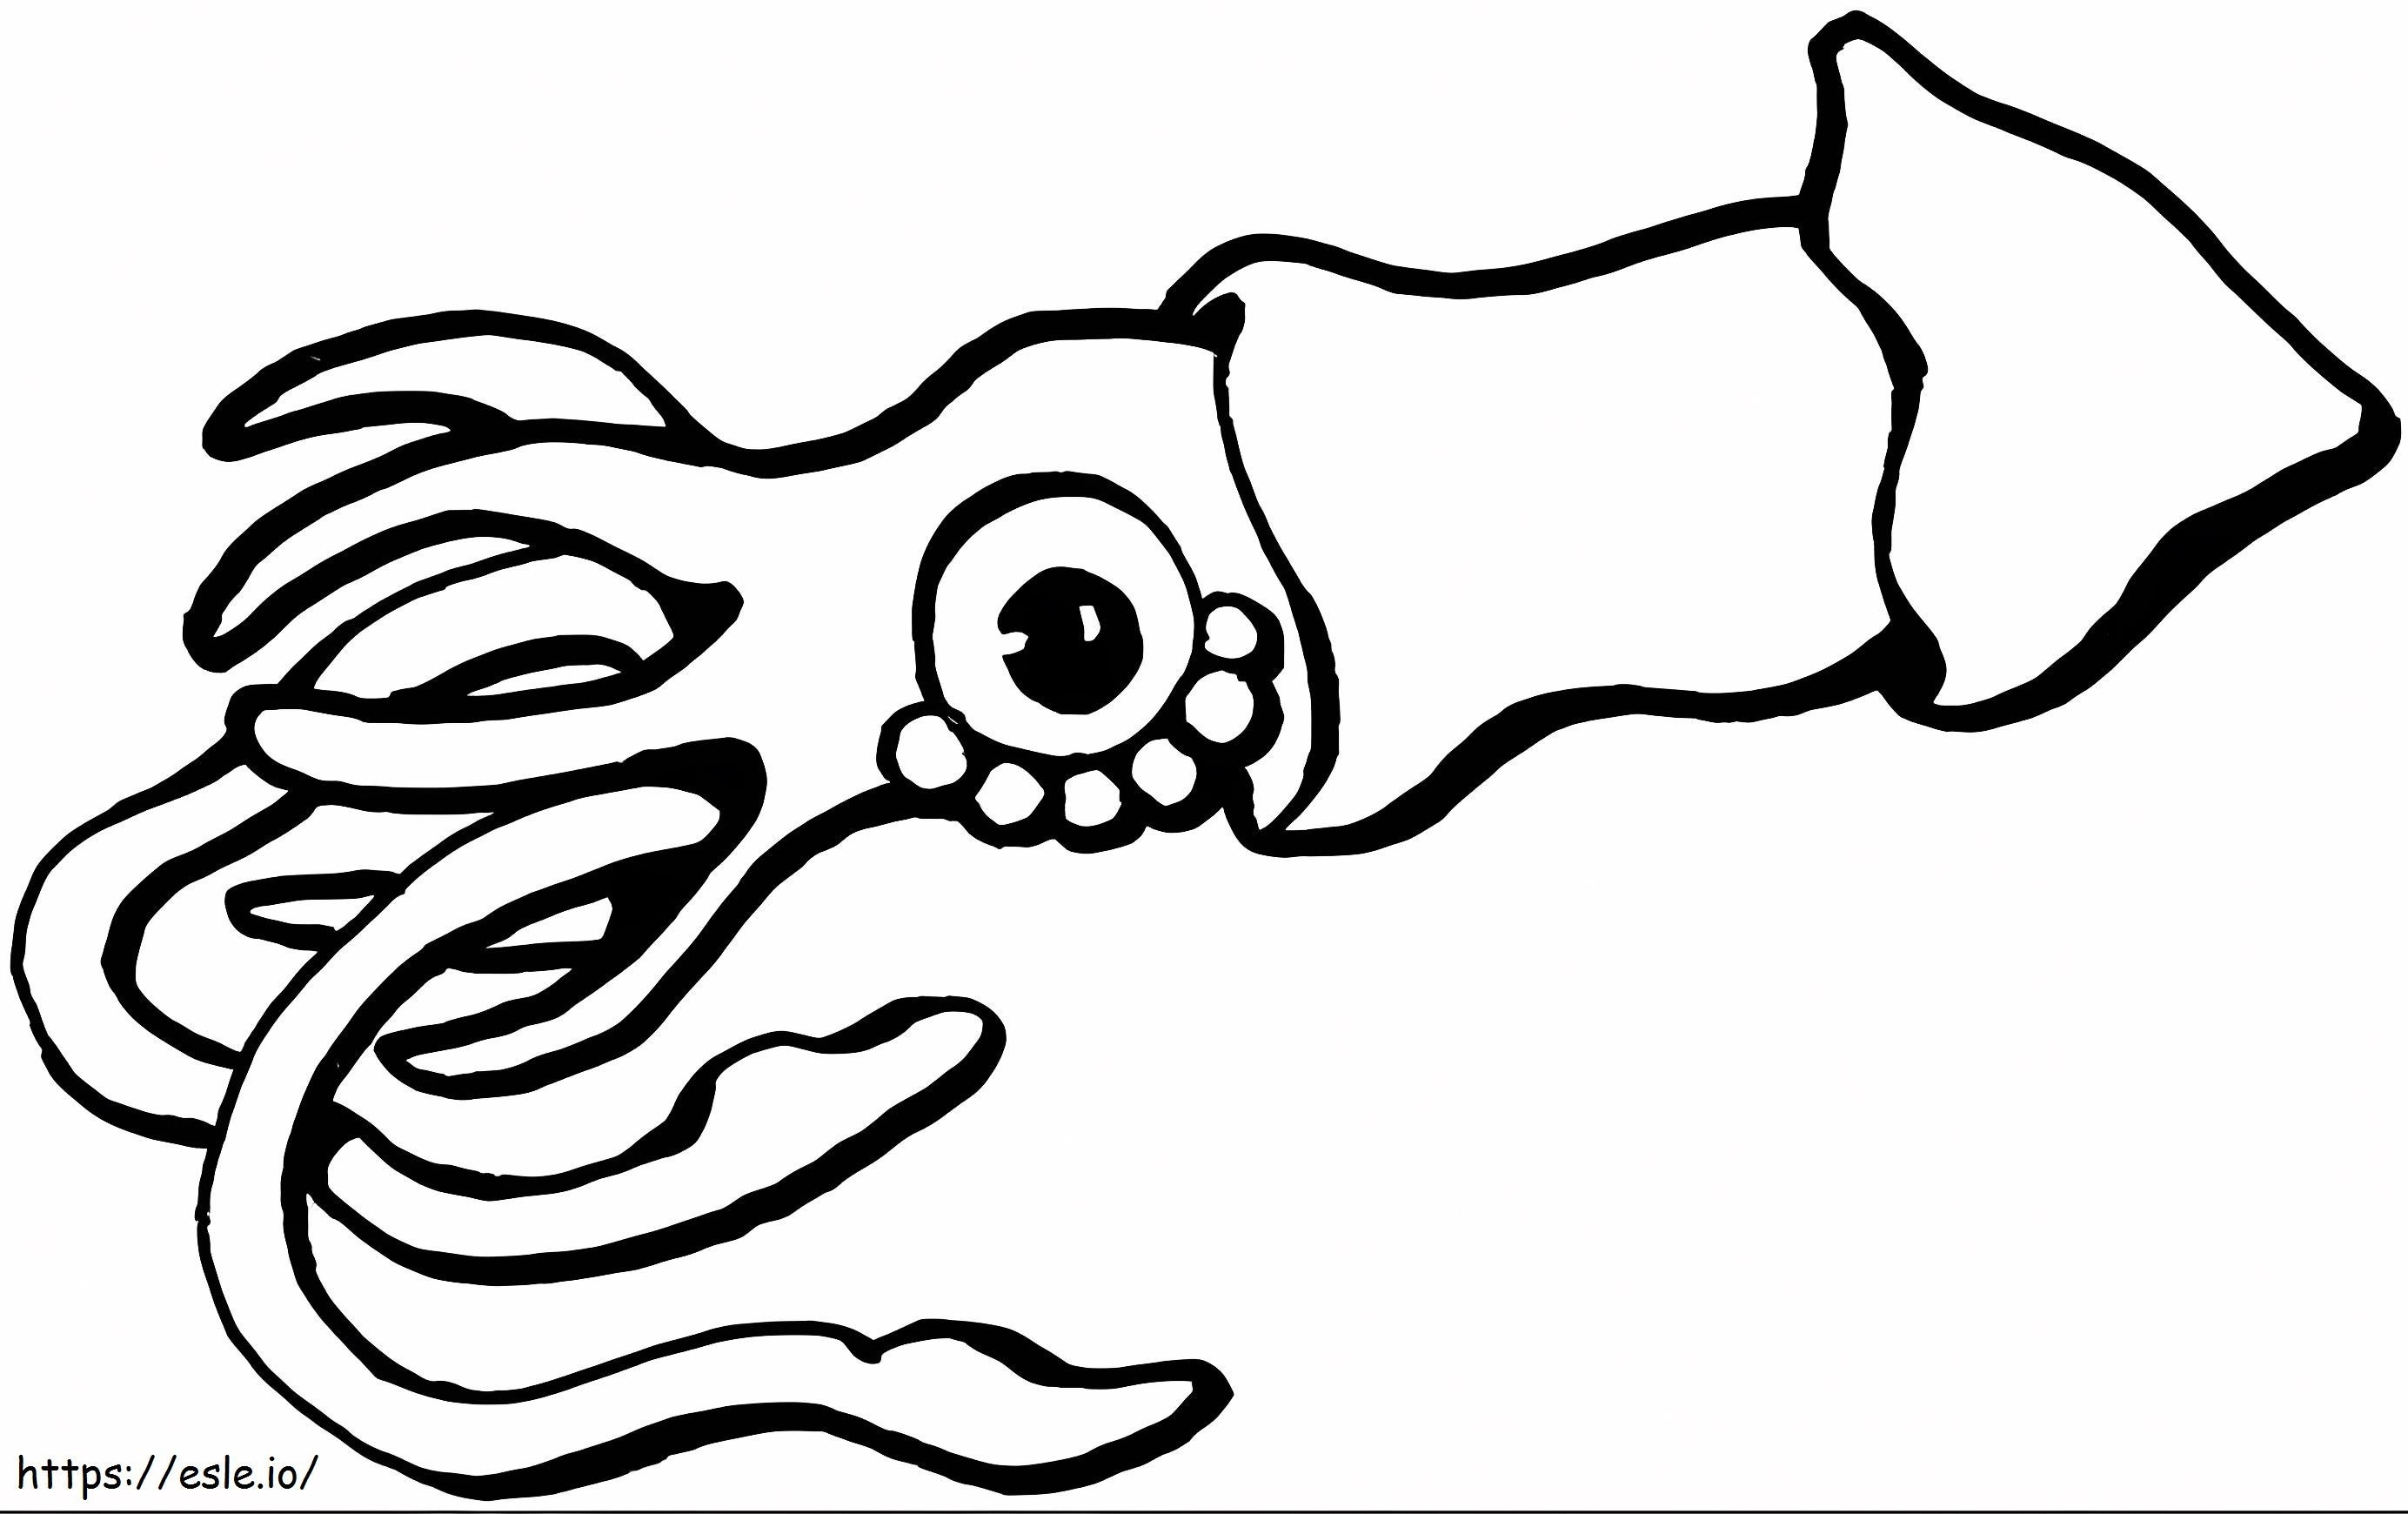 Awesome Squid coloring page